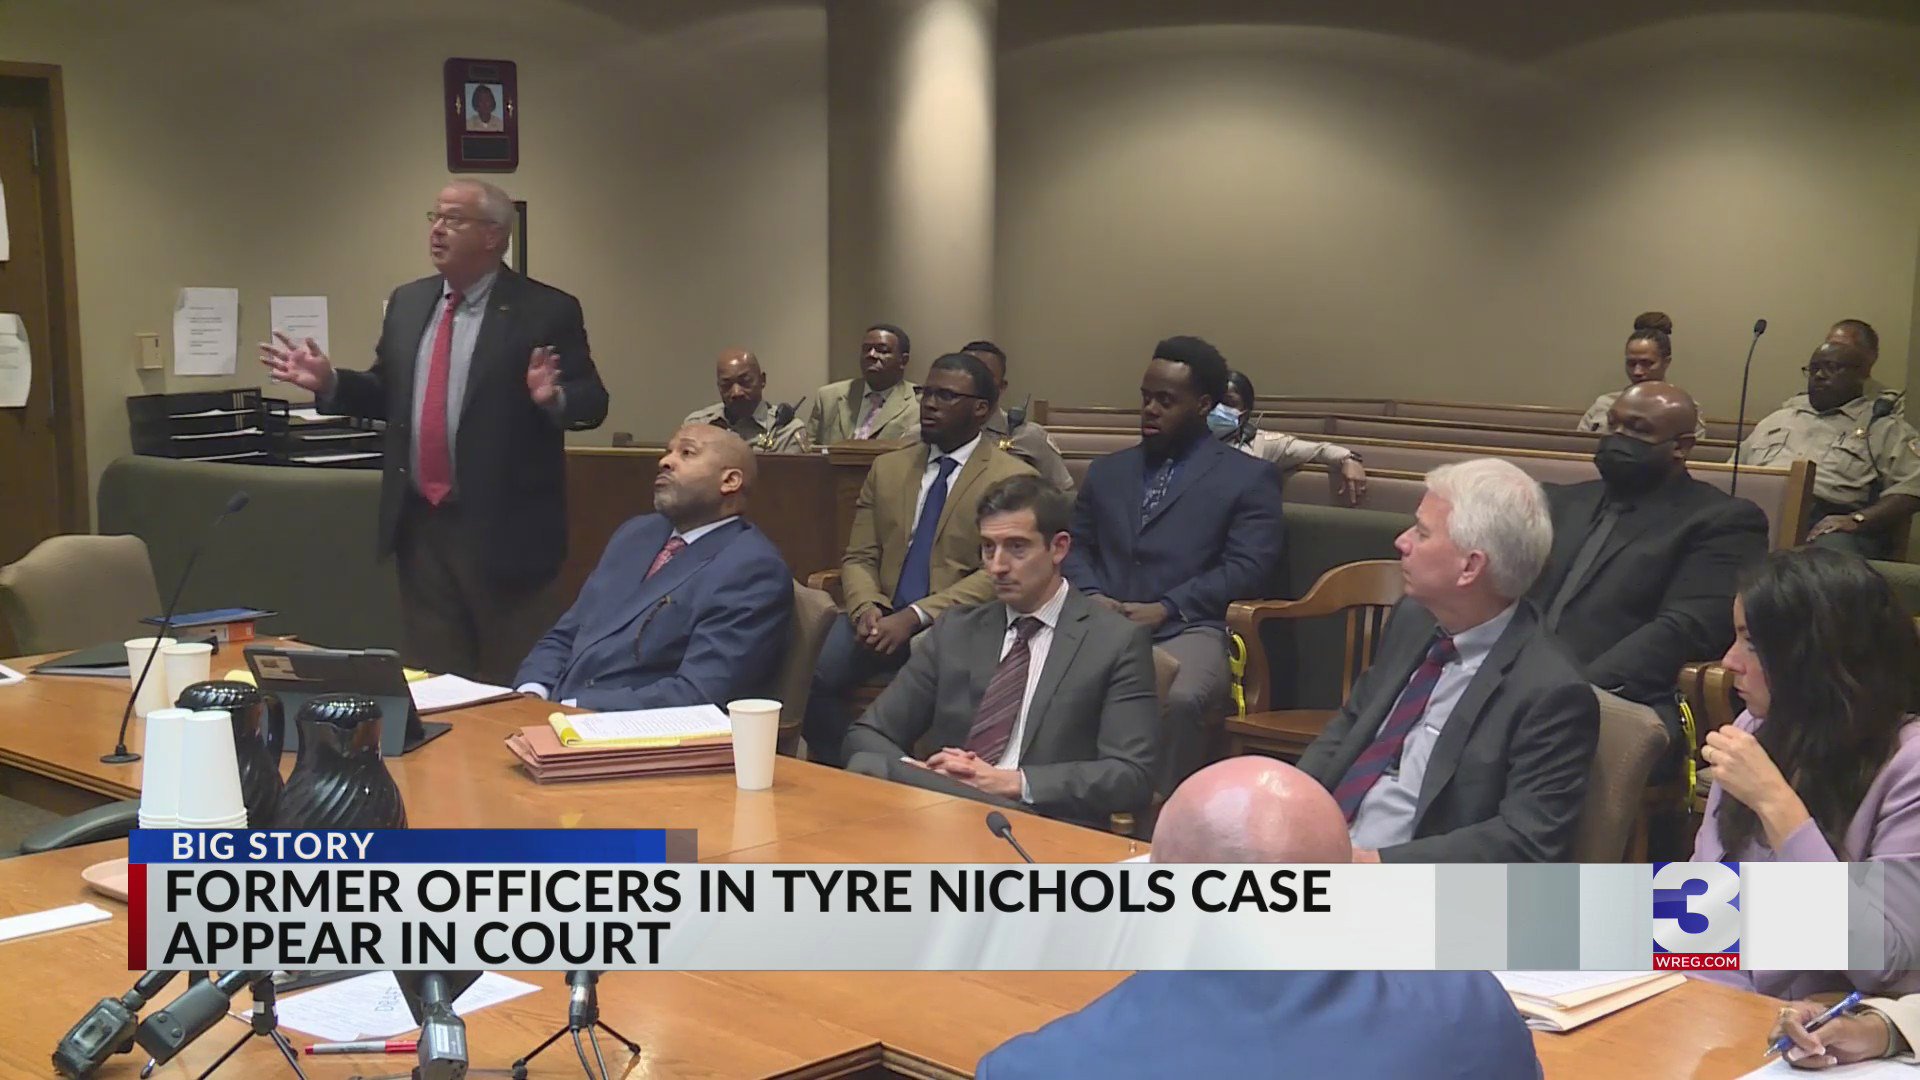 Former officers in Tyre Nichols case appear in court